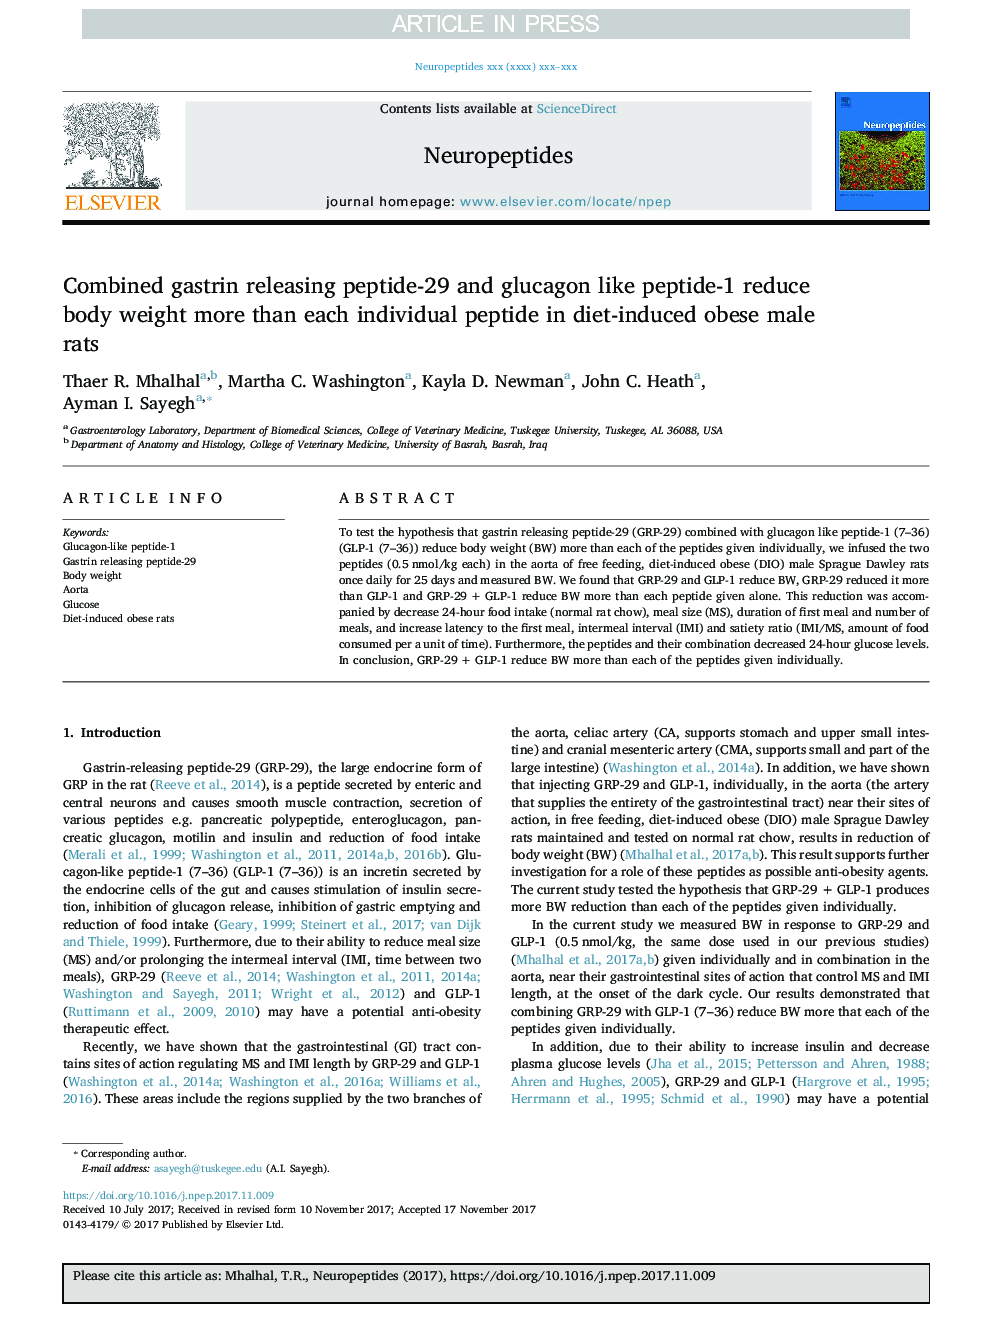 Combined gastrin releasing peptide-29 and glucagon like peptide-1 reduce body weight more than each individual peptide in diet-induced obese male rats